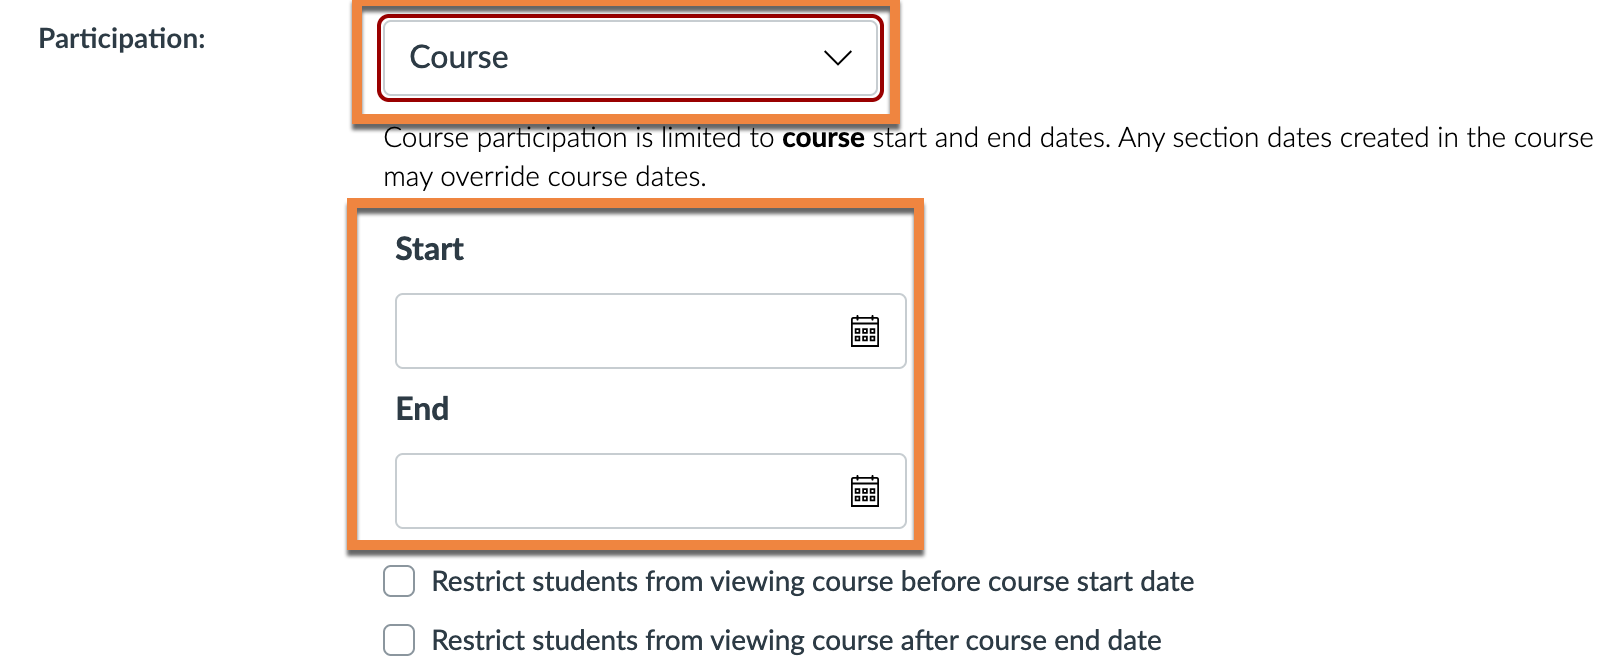 Participation dropdown is set to course, and the course start and end dates are highlighted